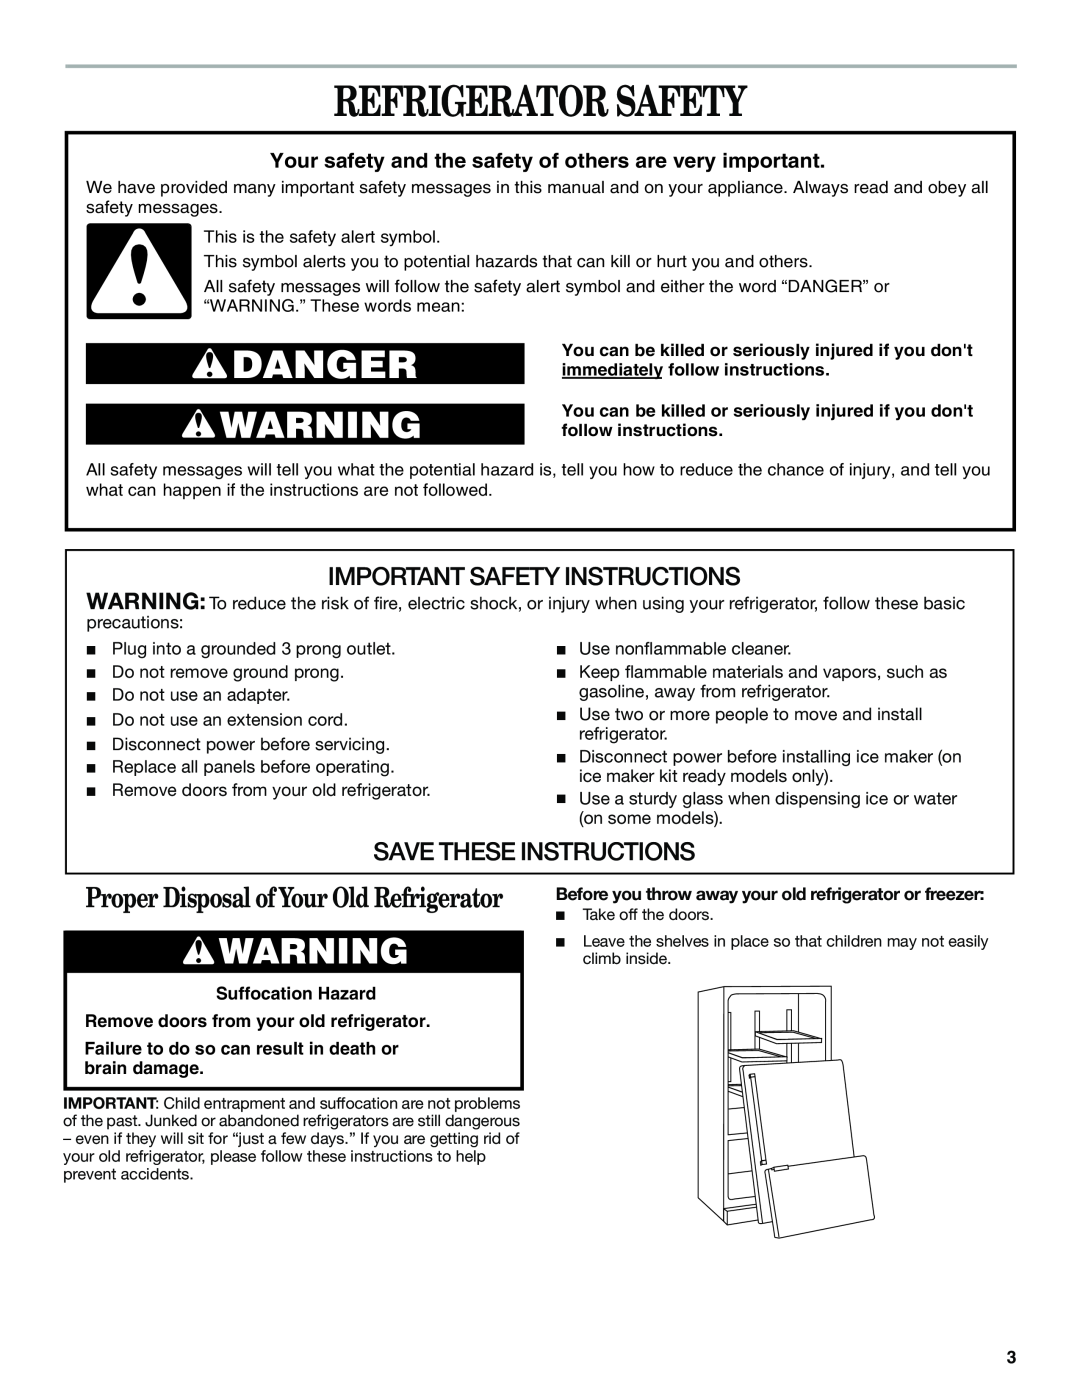 Whirlpool GB2SHKLLS00 manual Refrigerator Safety, Proper Disposal of Your Old Refrigerator, Important Safety Instructions 